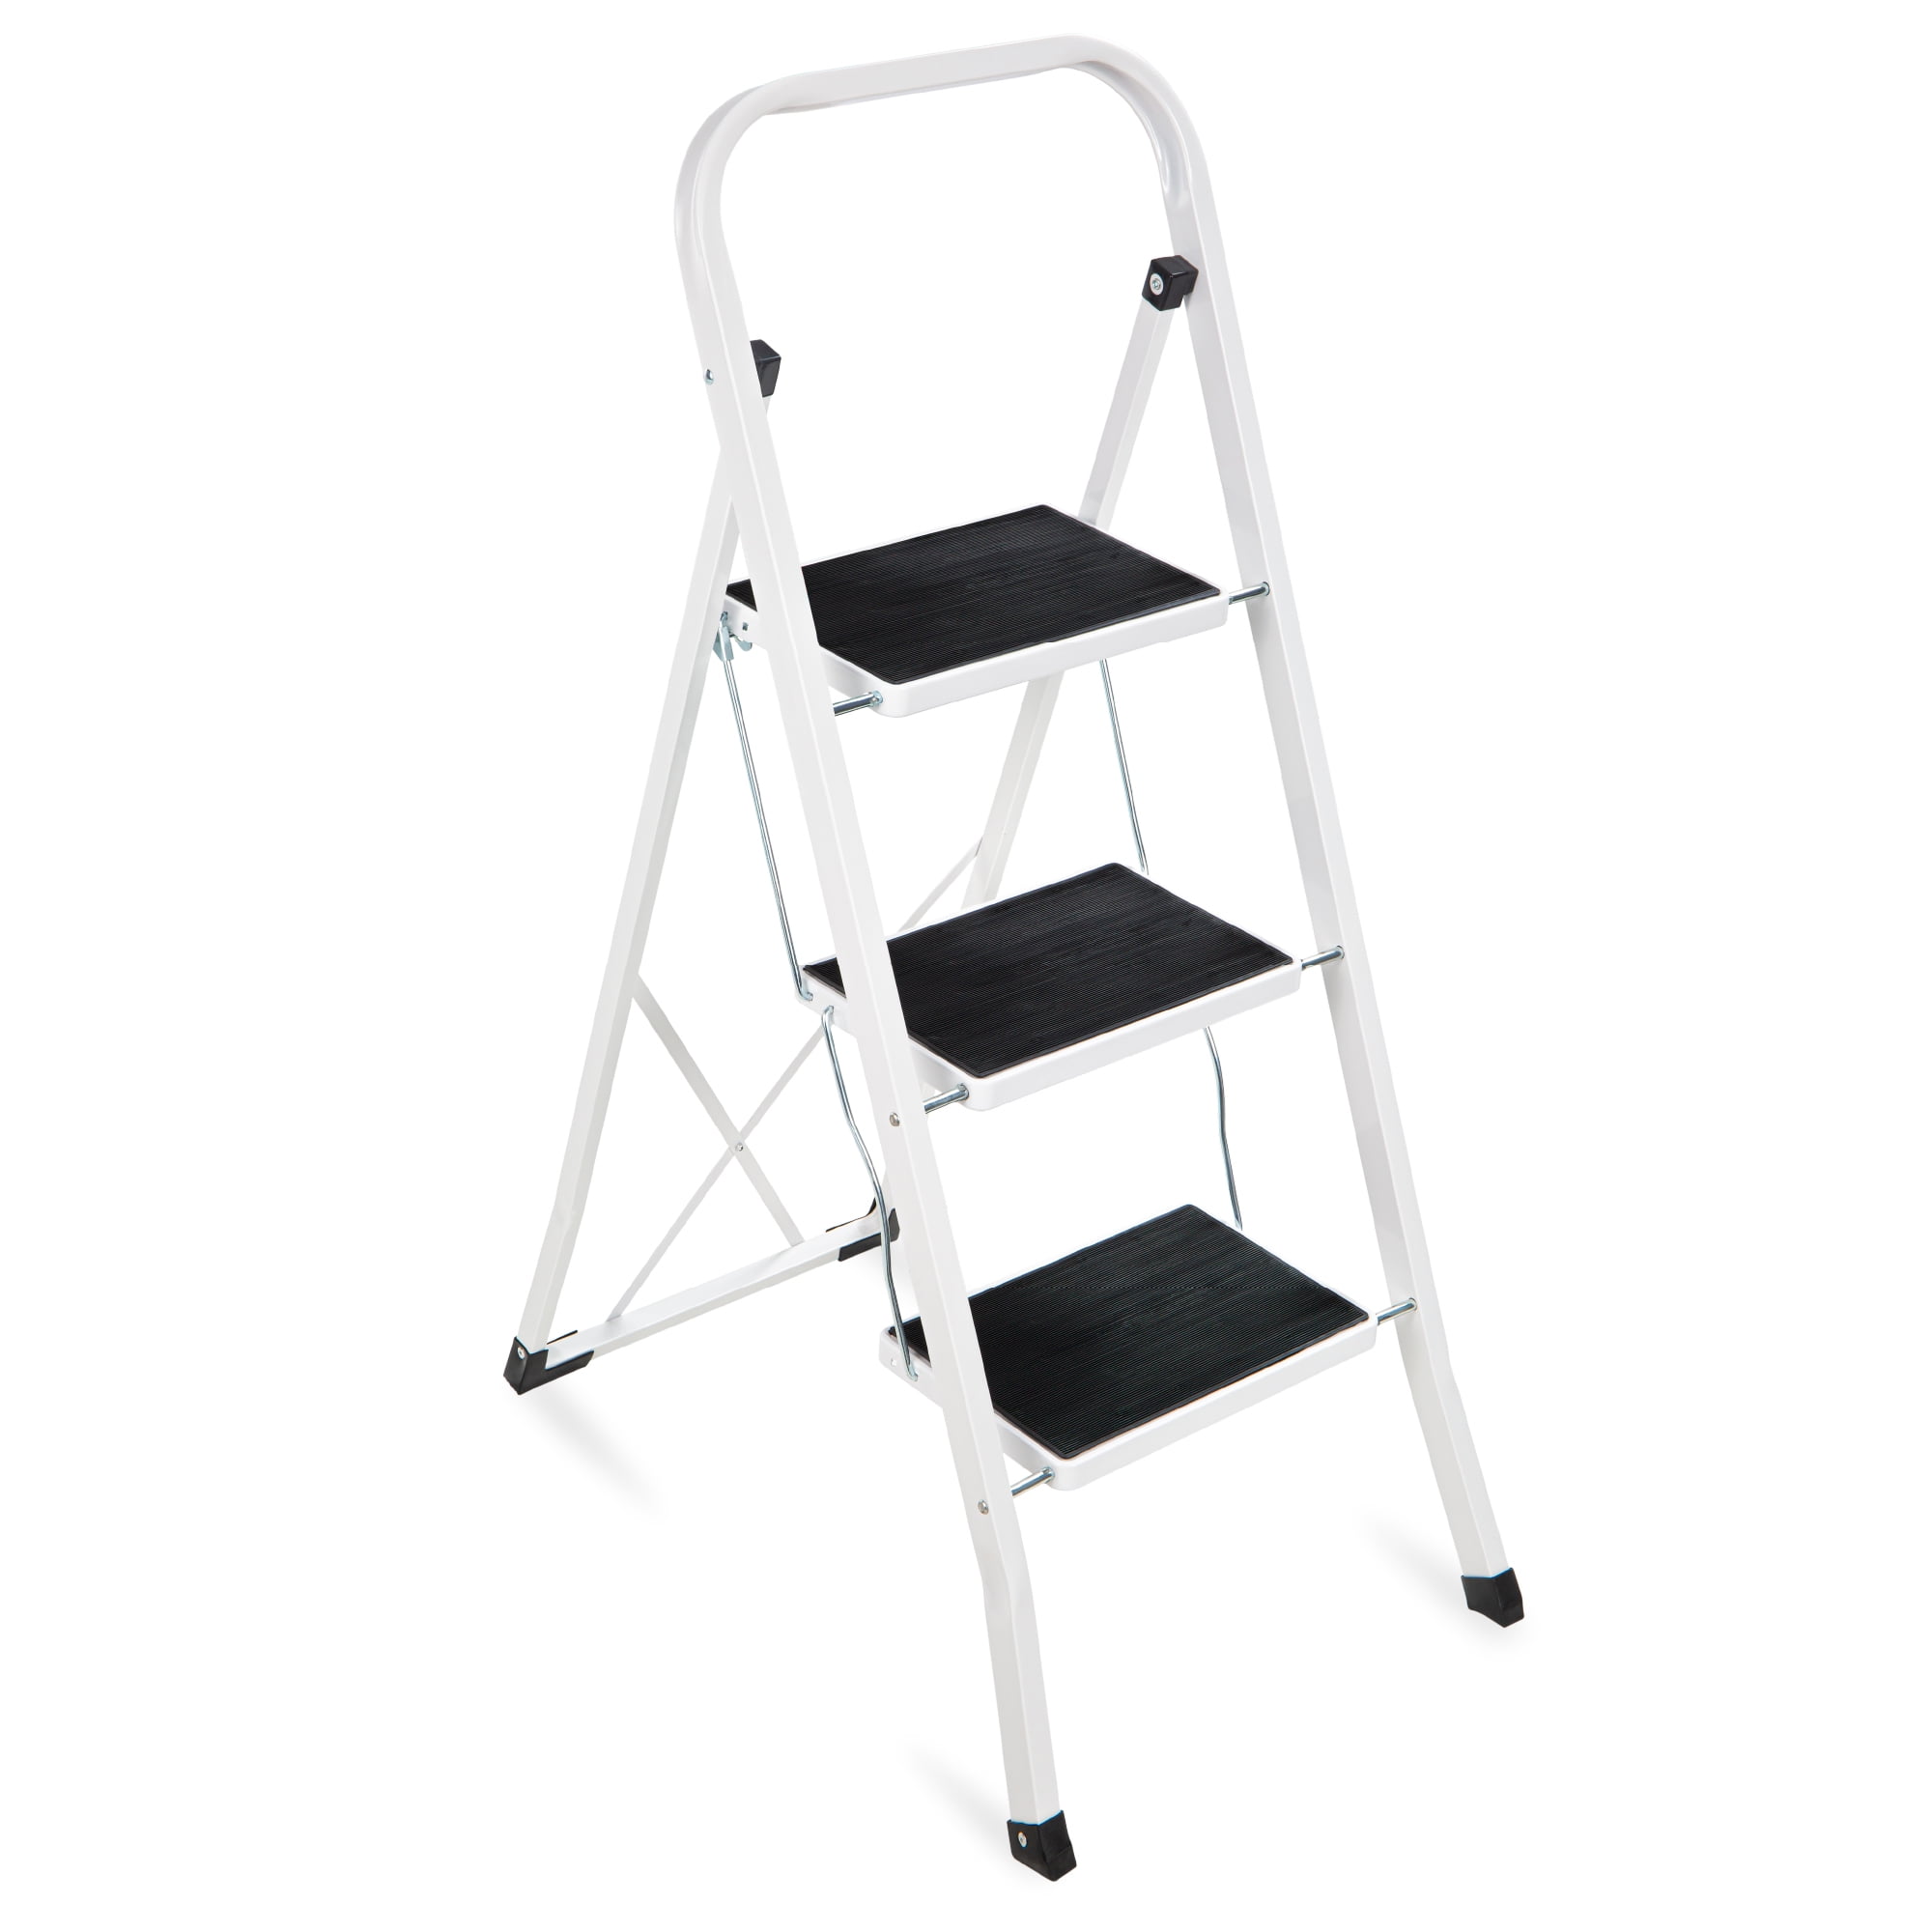 Folding Portable Step Ladder Heavy Duty Steel Stepladder 3 Tread Extra Large Steps Support with Non-Slip Rubber Feet Idea for Home/Kitchen/Garage 150kg Load Capacity